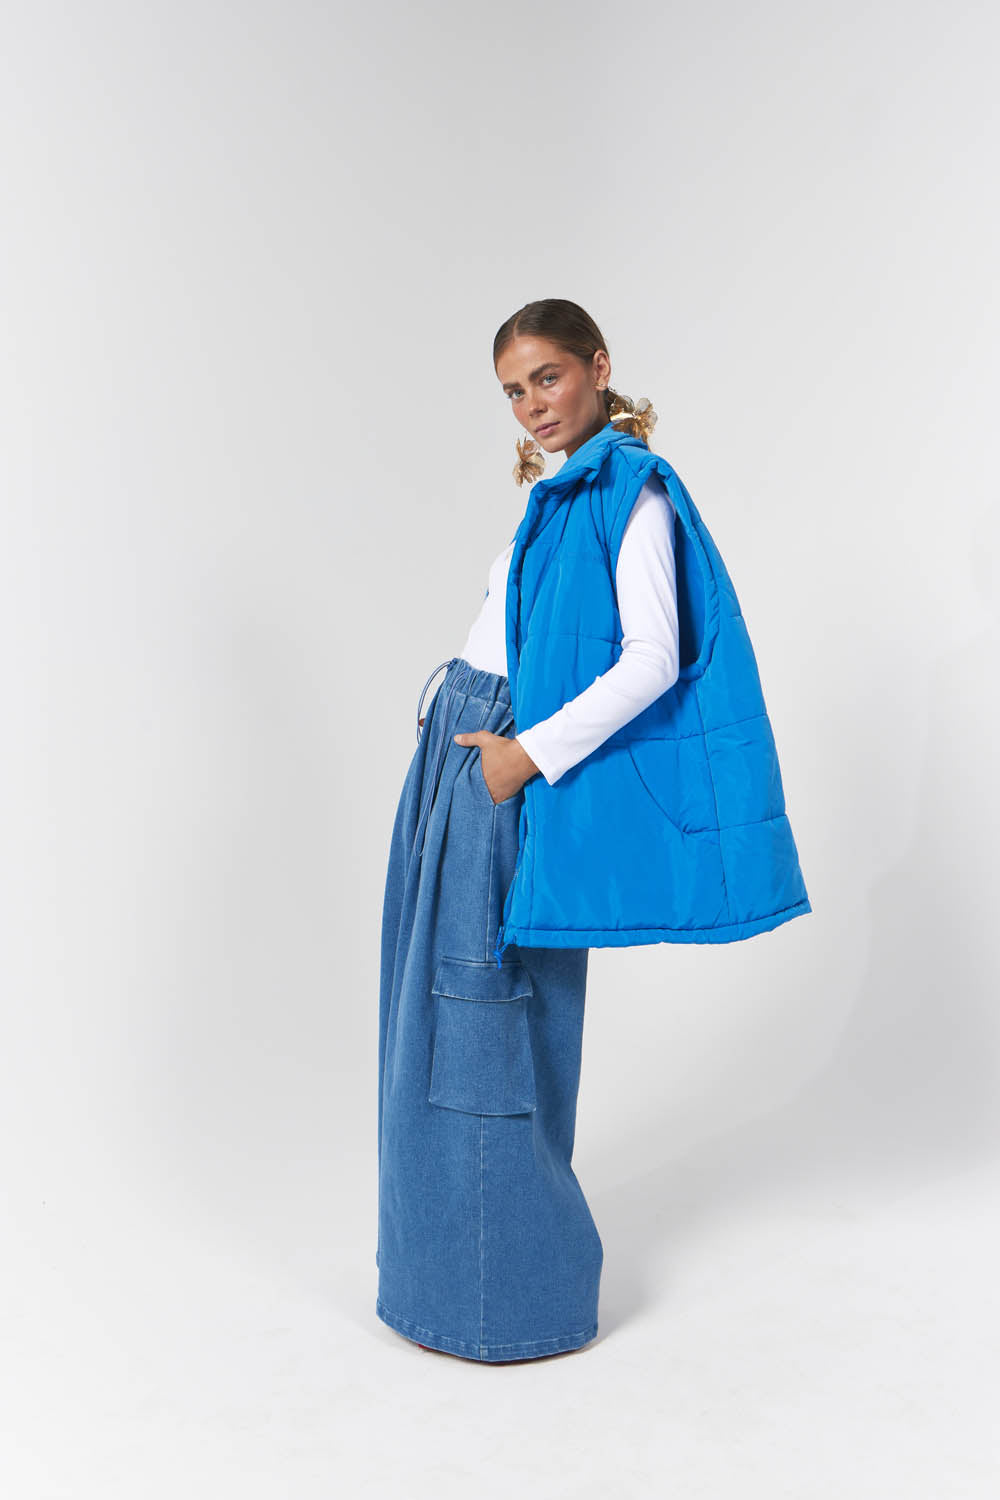 Model wearing blue puffer vest perfect for winter fashion